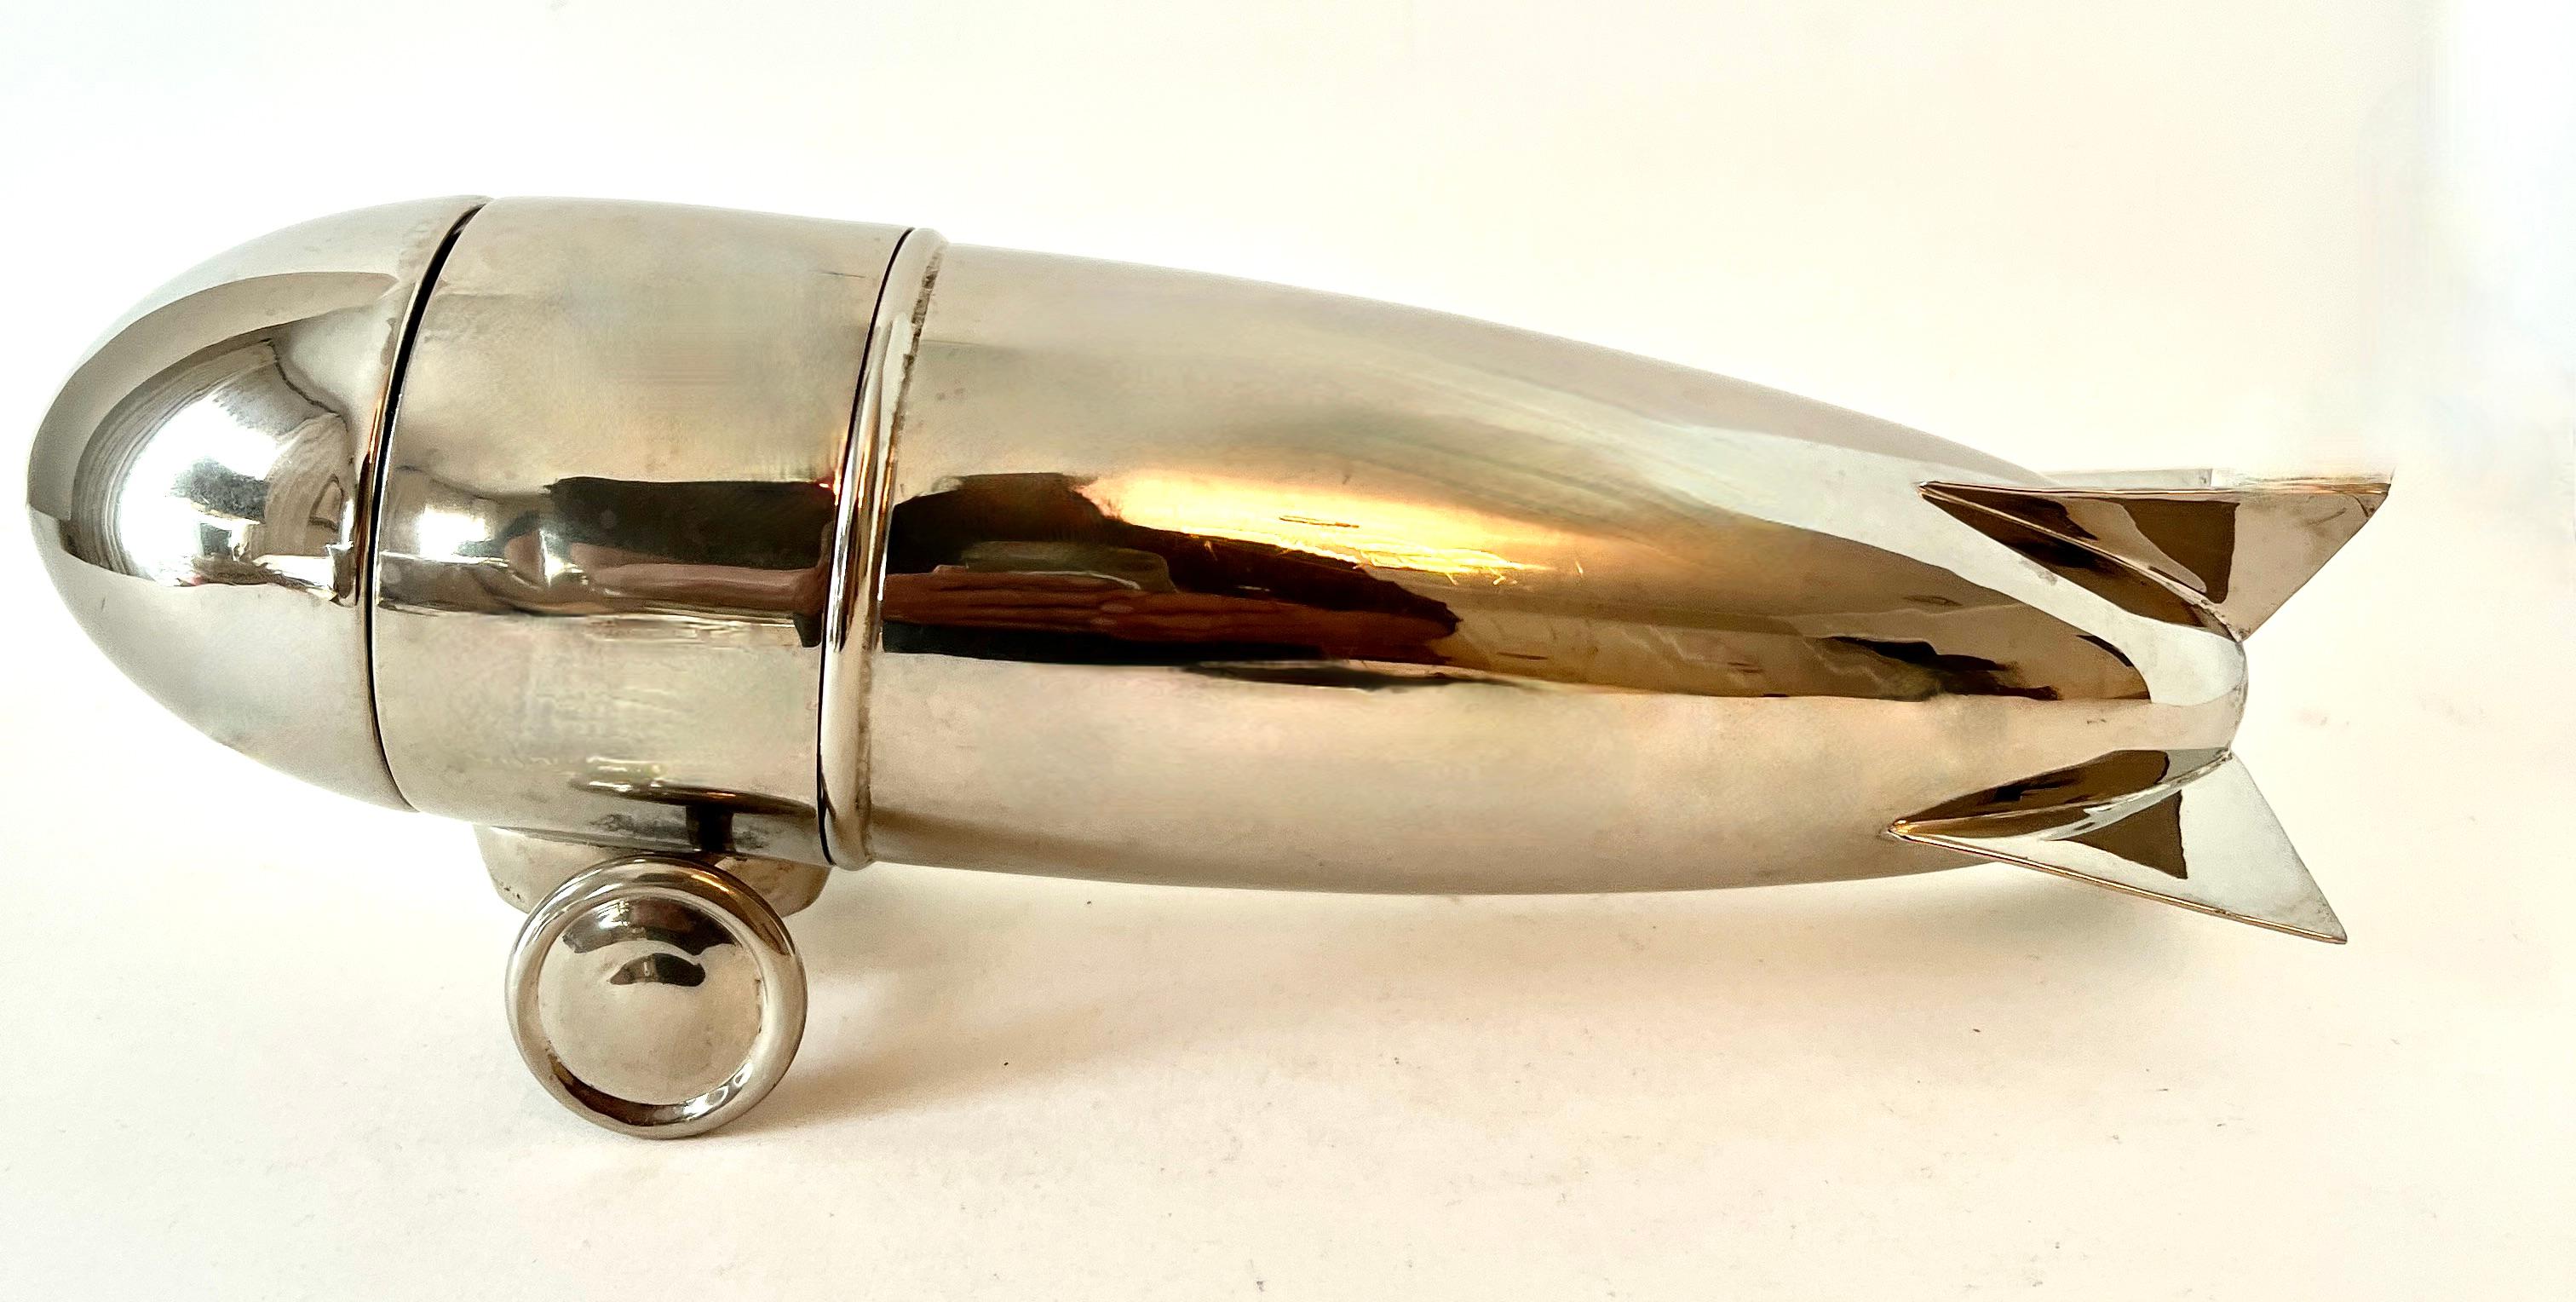 German Zeppelin Cocktail Shaker Circa 1930 Art Deco In Good Condition For Sale In Los Angeles, CA